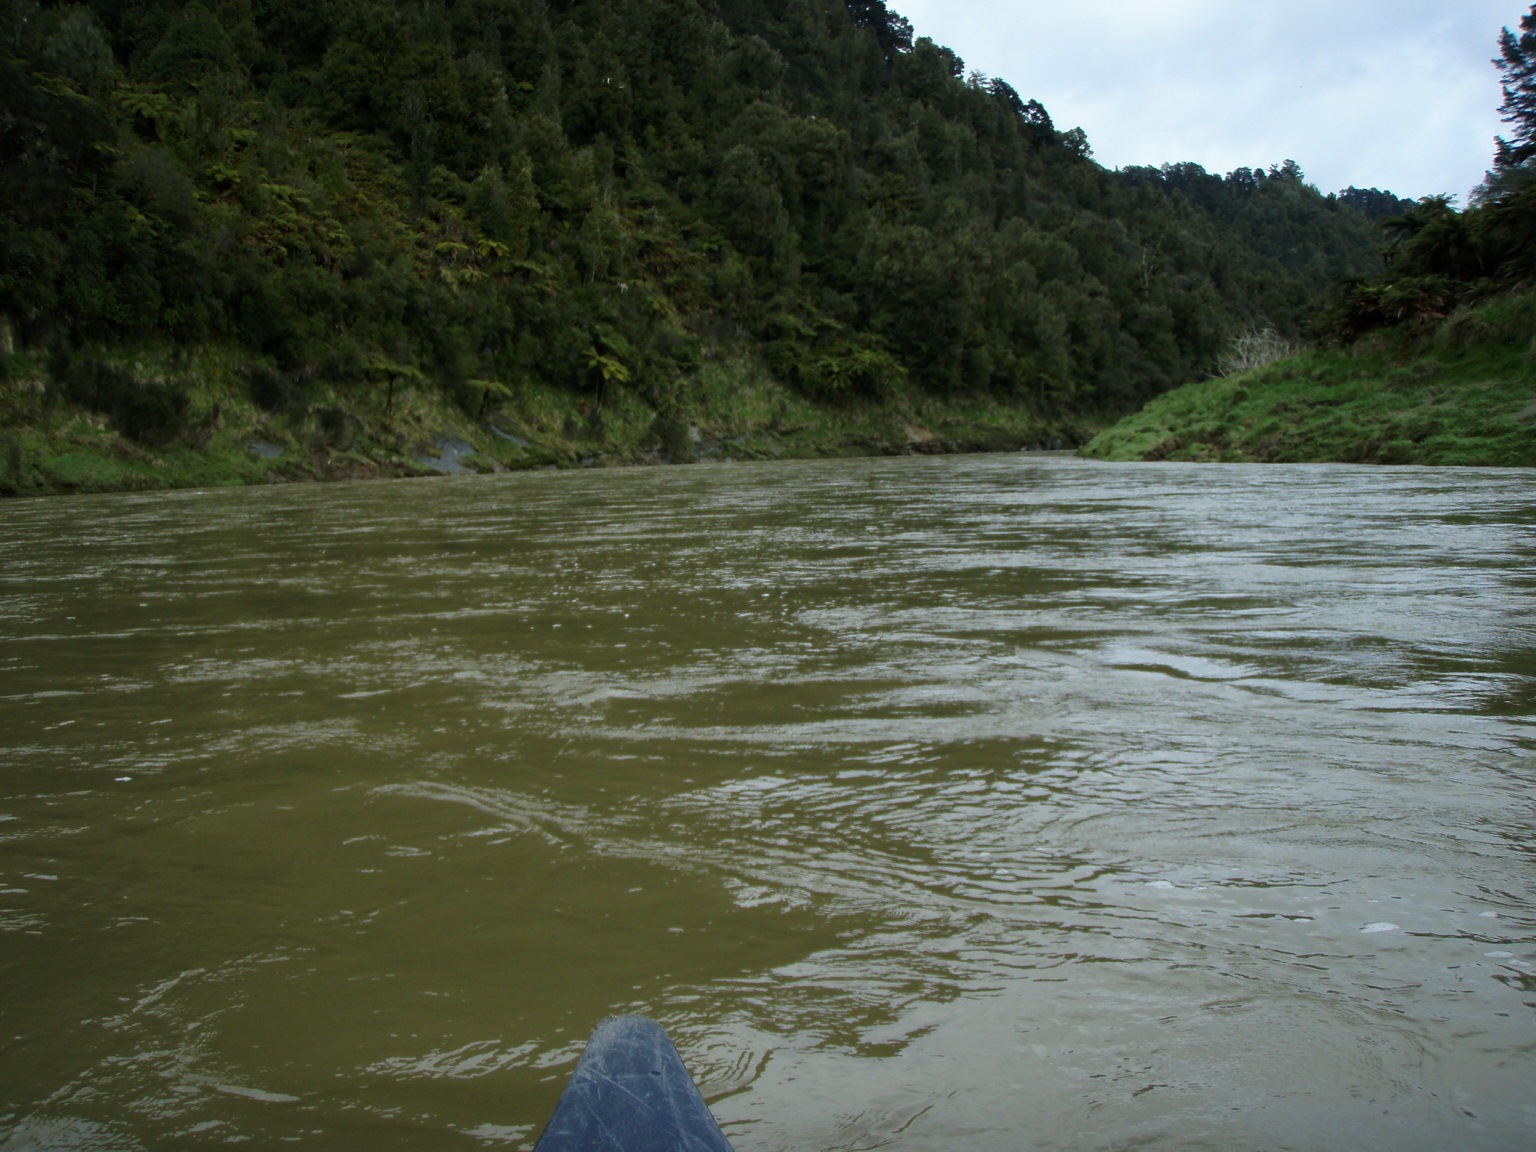 The river on day 1